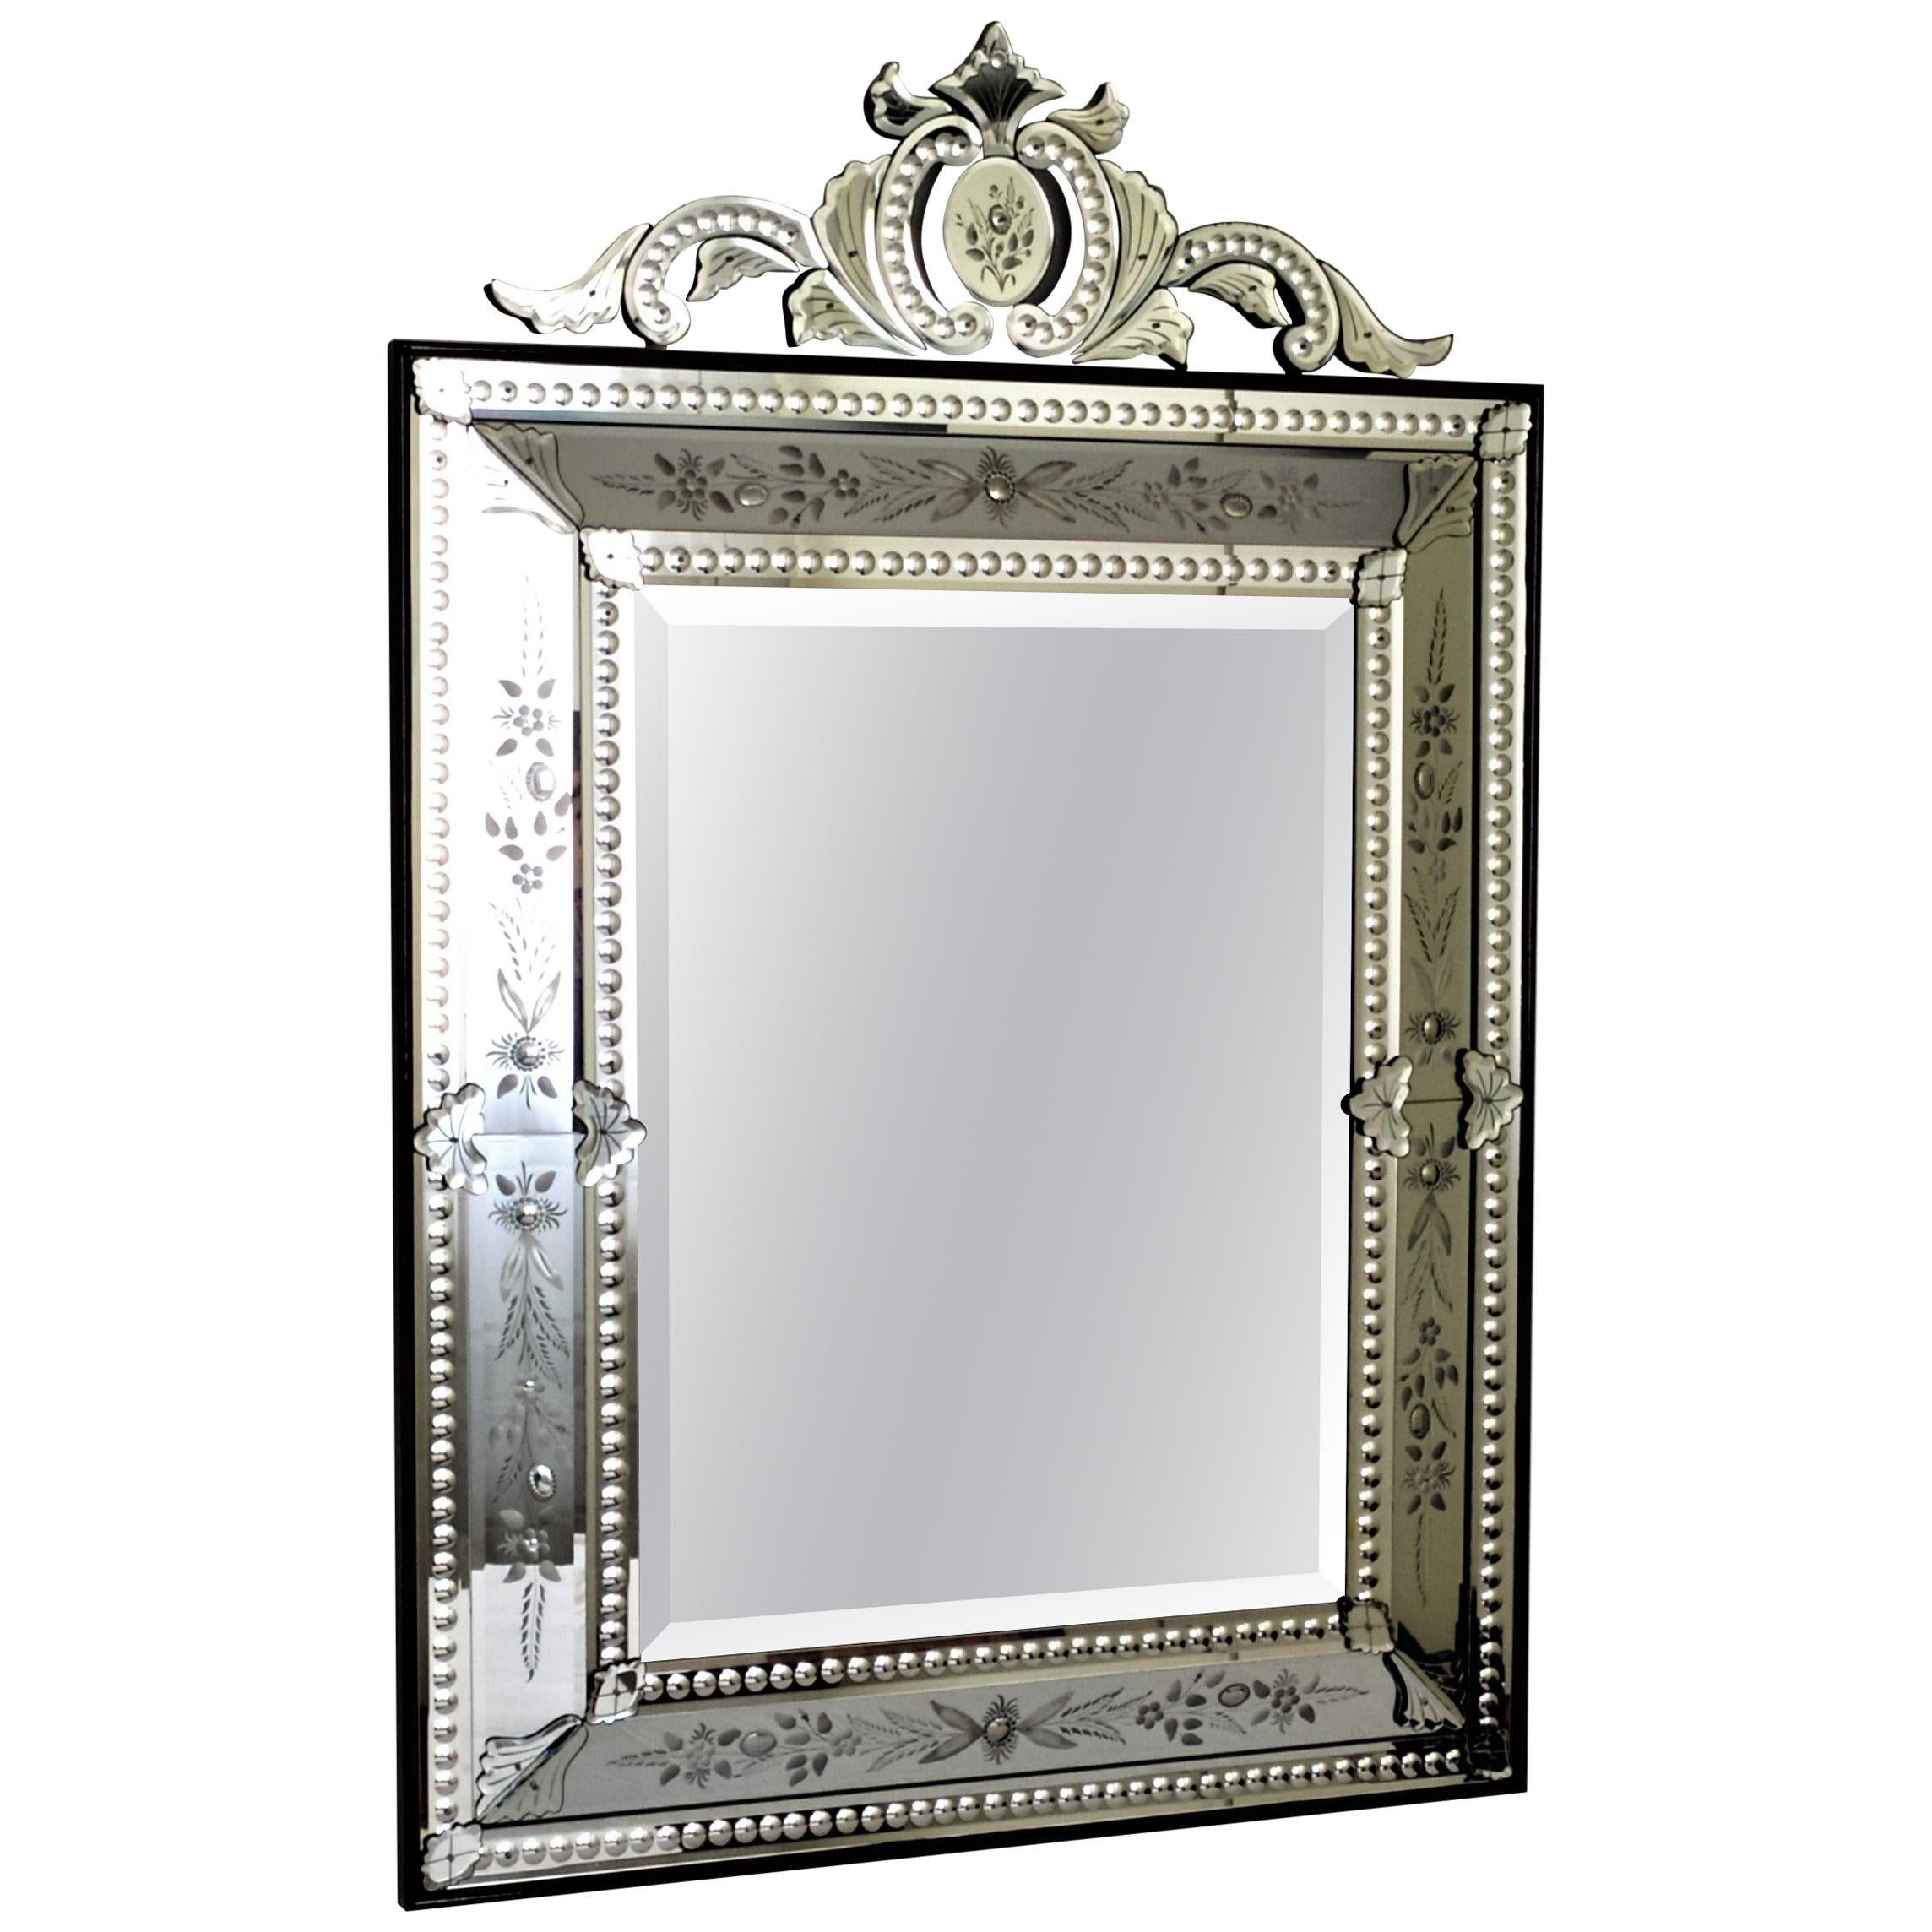 "Ca' Rezzonico" Murano Glass Mirror in French Style Handcrafted by Fratelli Tosi For Sale